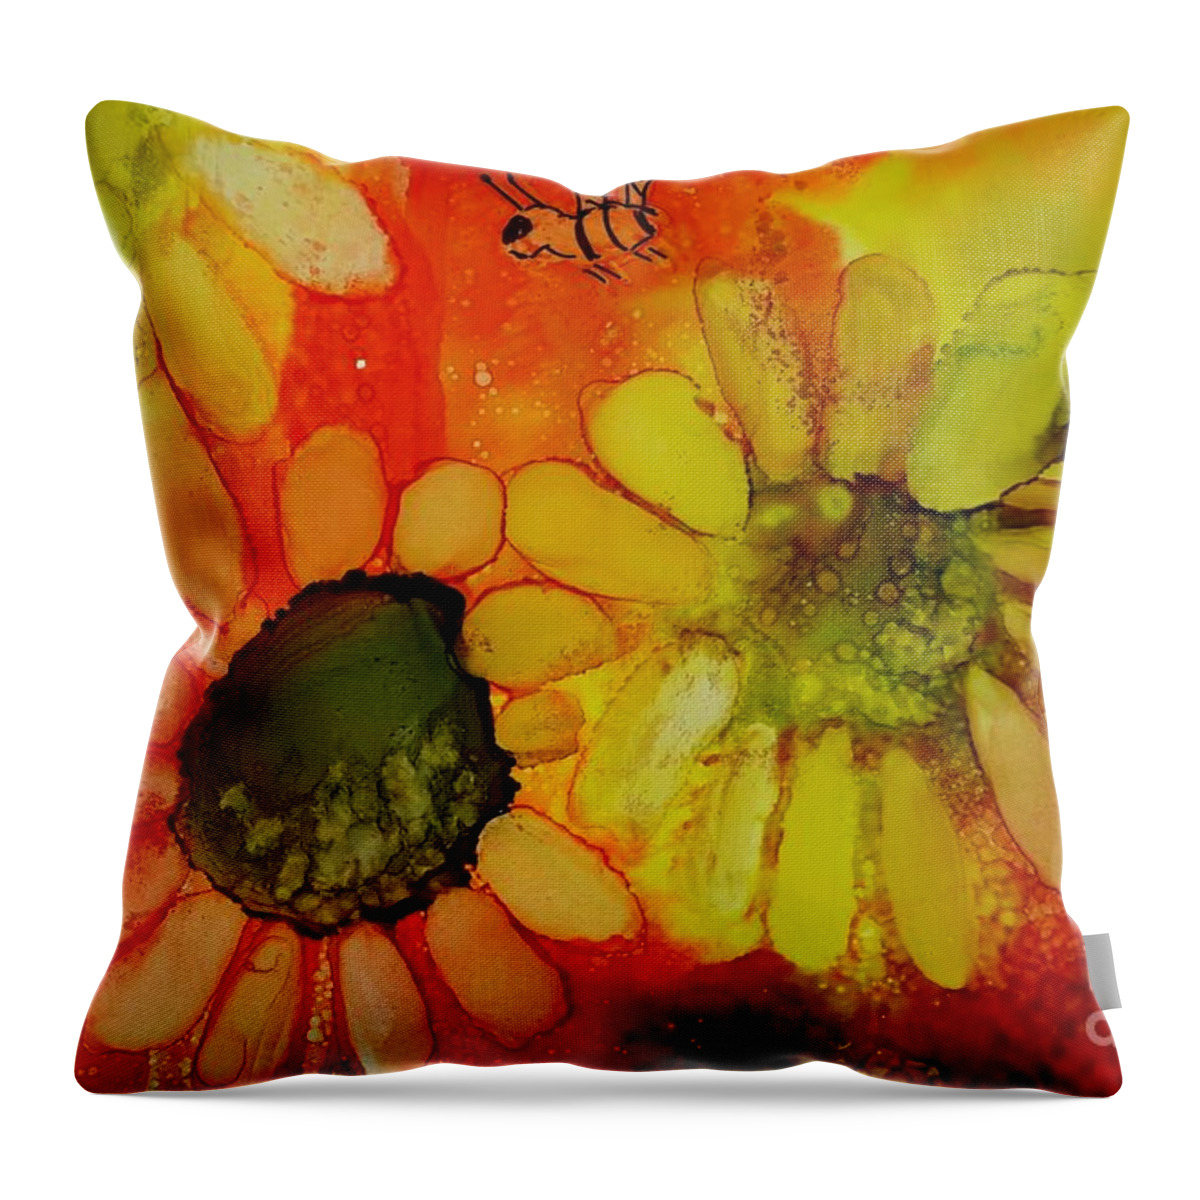 Alcohol Throw Pillow featuring the painting Flower Power by Terri Mills